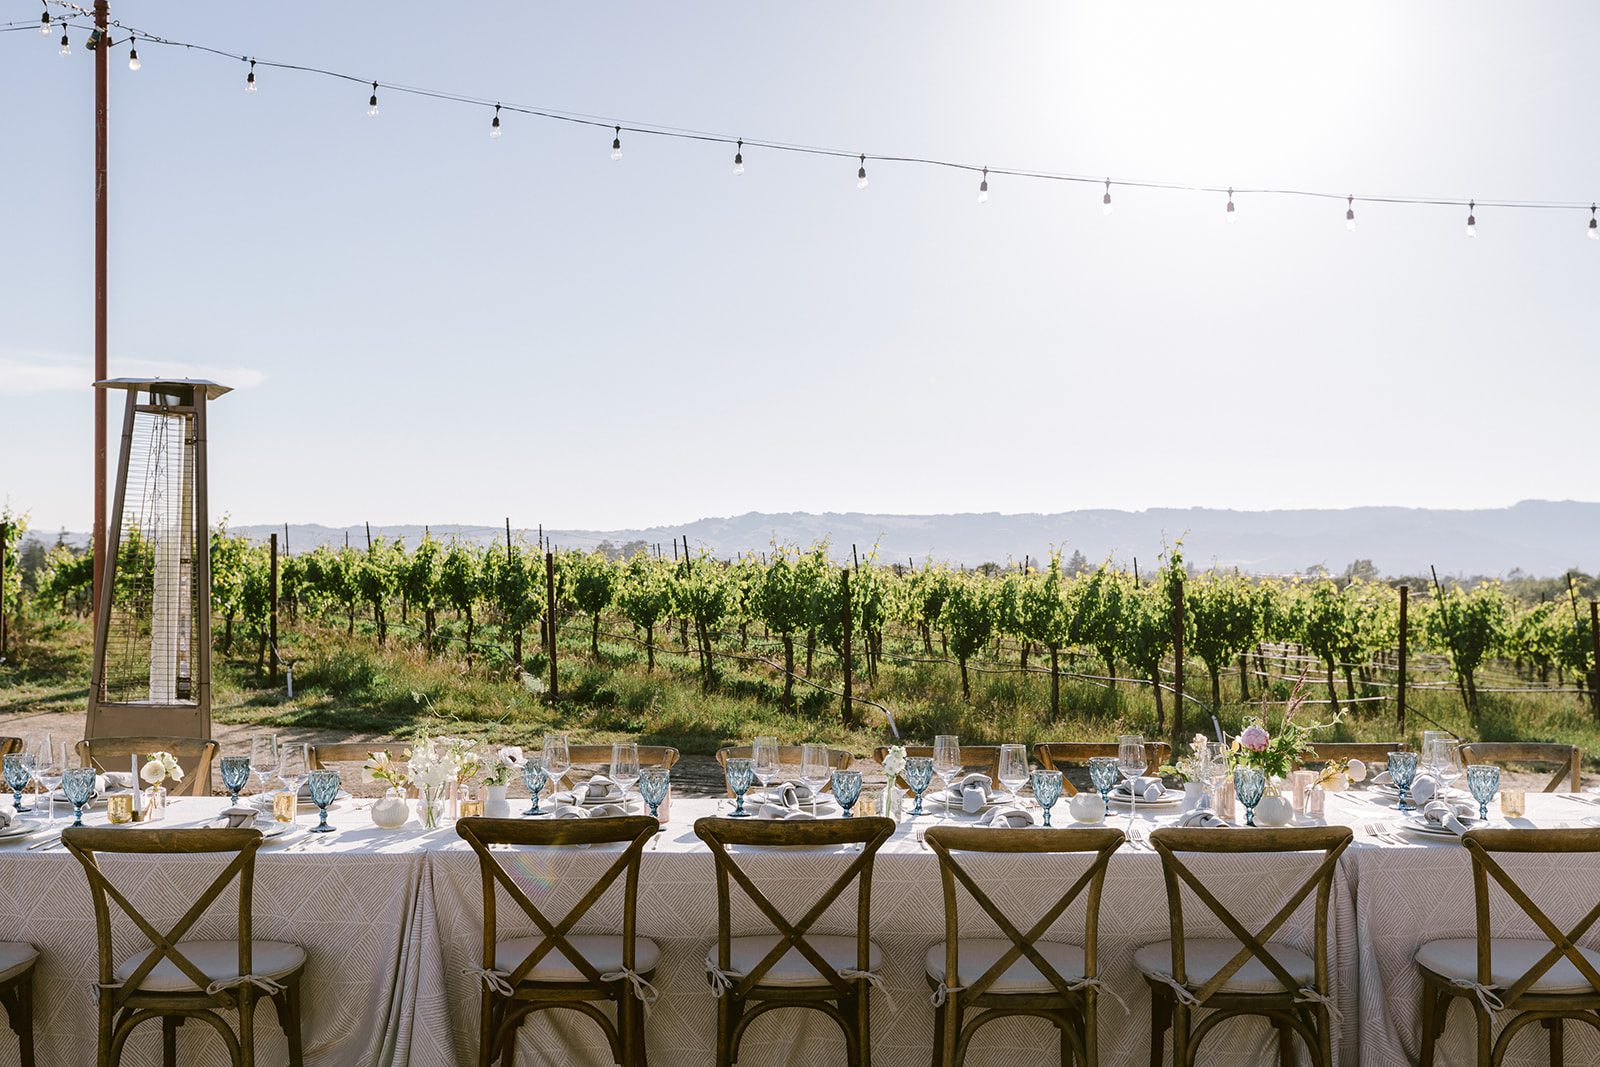 A table set up in a vineyard.